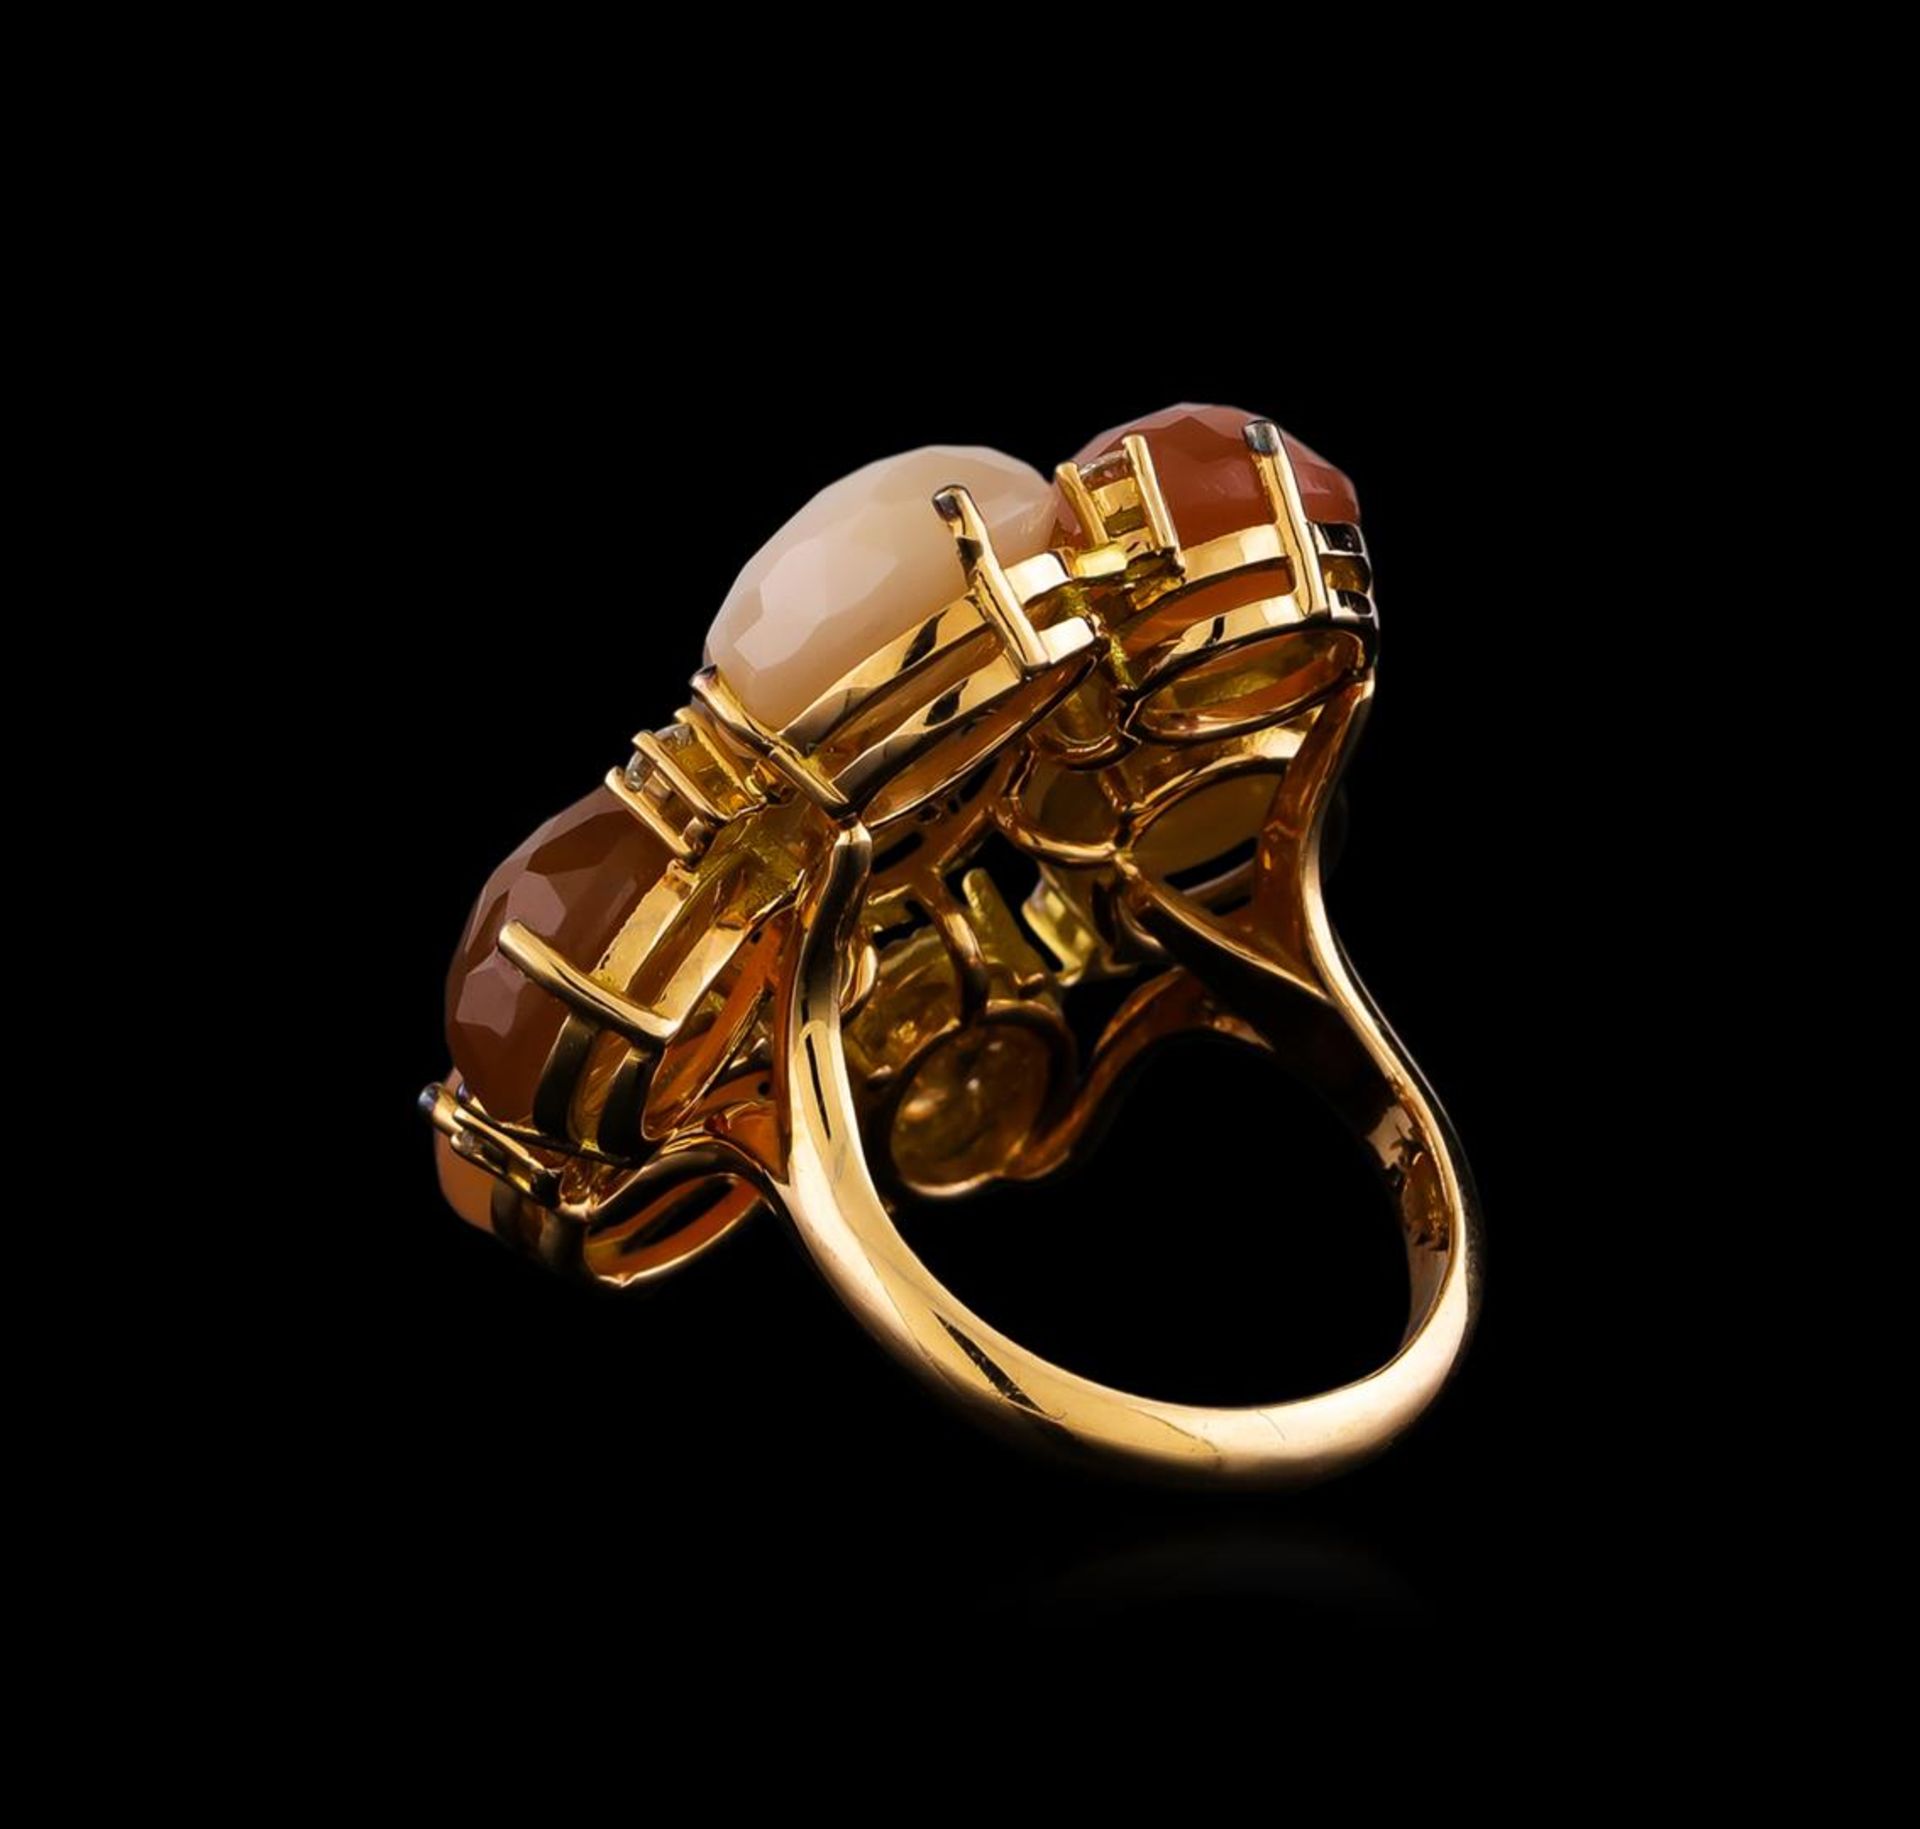 25.14 ctw Sunstone and Diamond Ring - 18KT Yellow Gold - Image 3 of 5